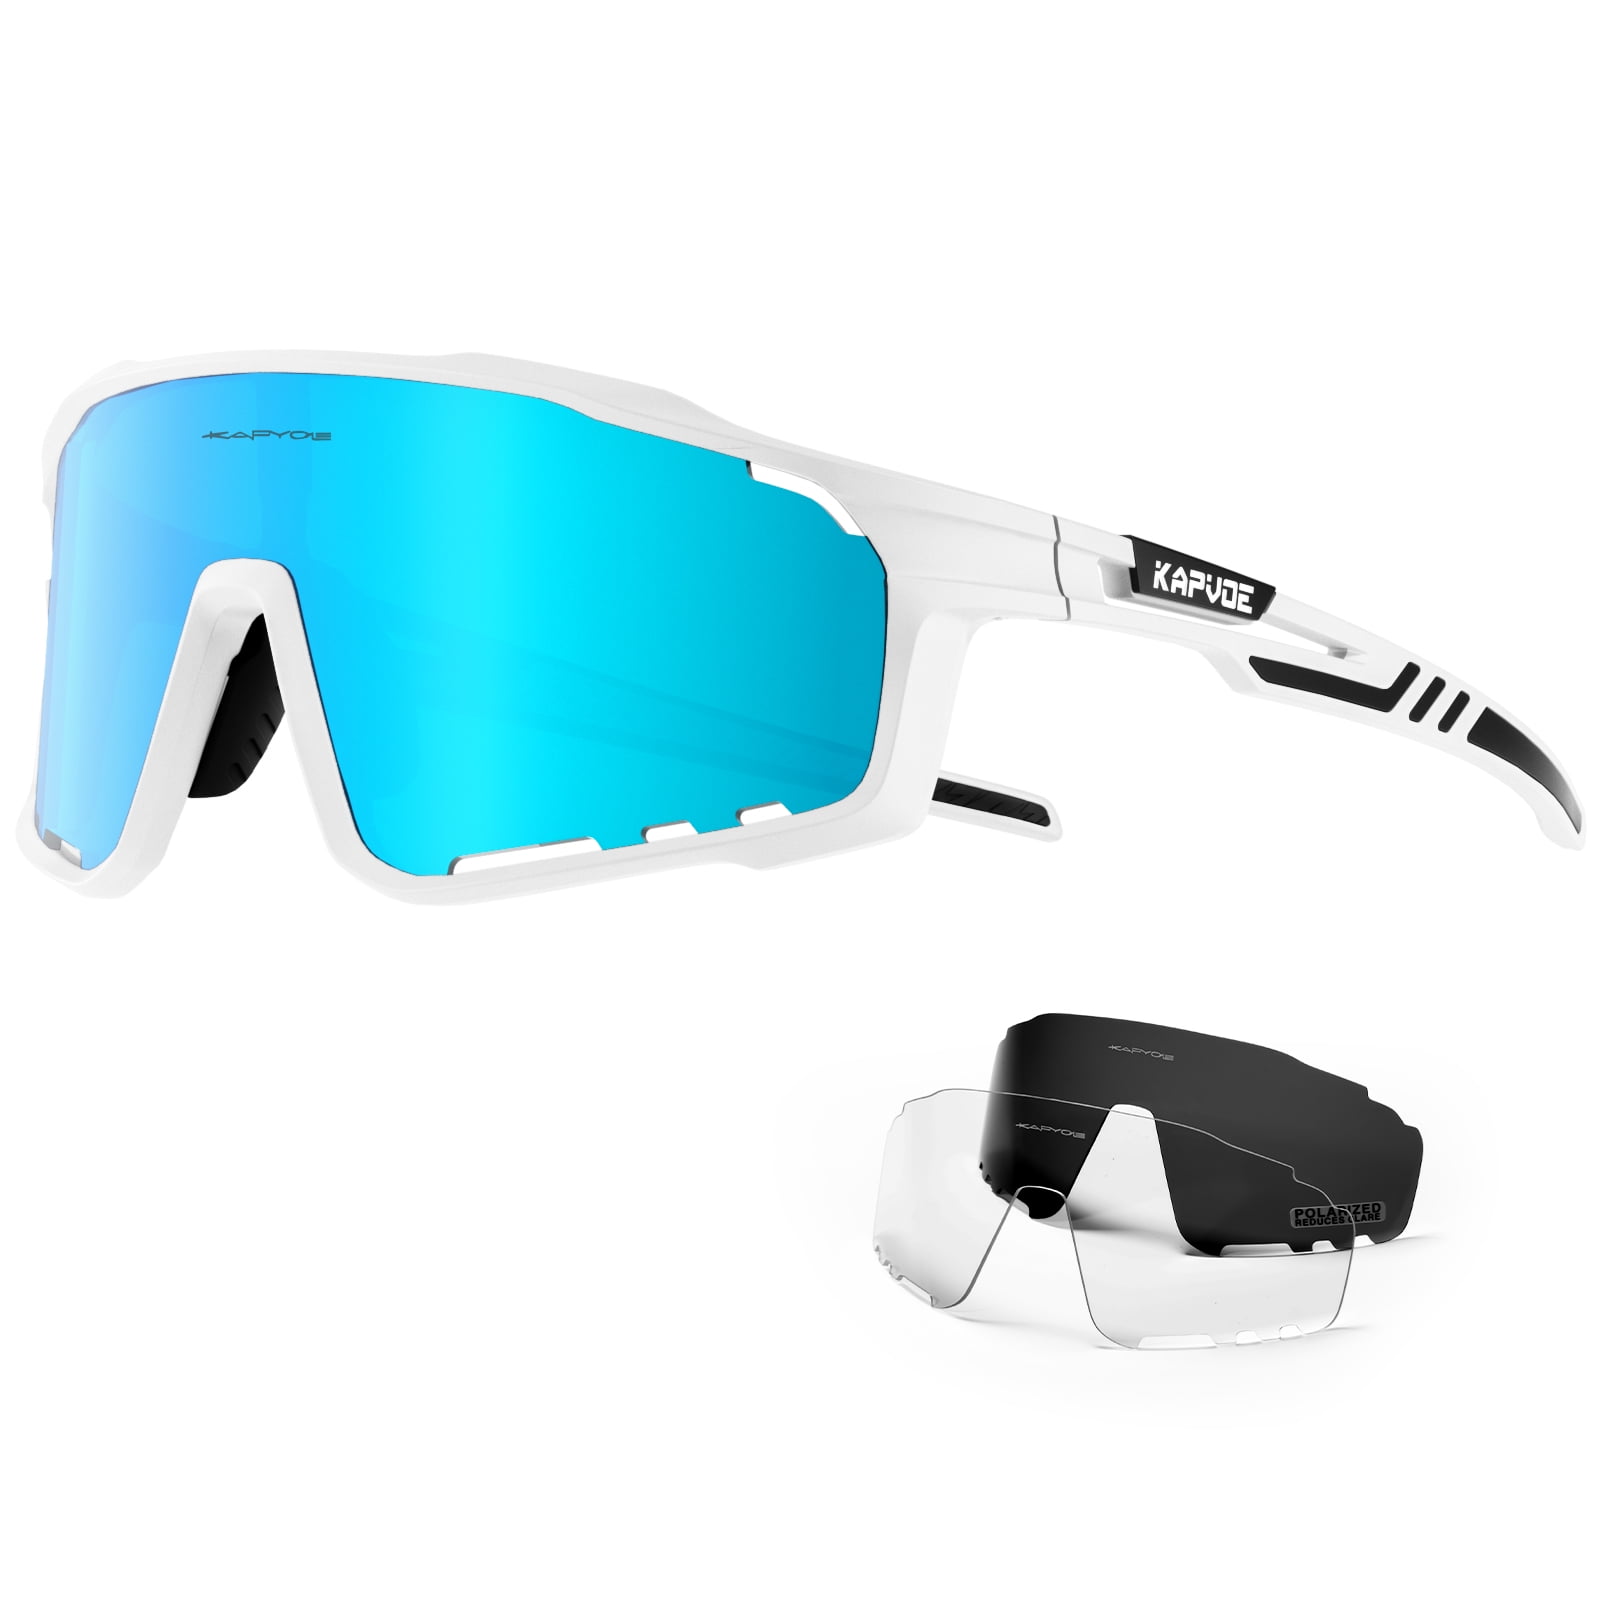 Polarized Cycling Sunglasses For Men MTB, Bike, Hiking & Road Riding  Goggles With Clear Vision From Ren05, $9.09